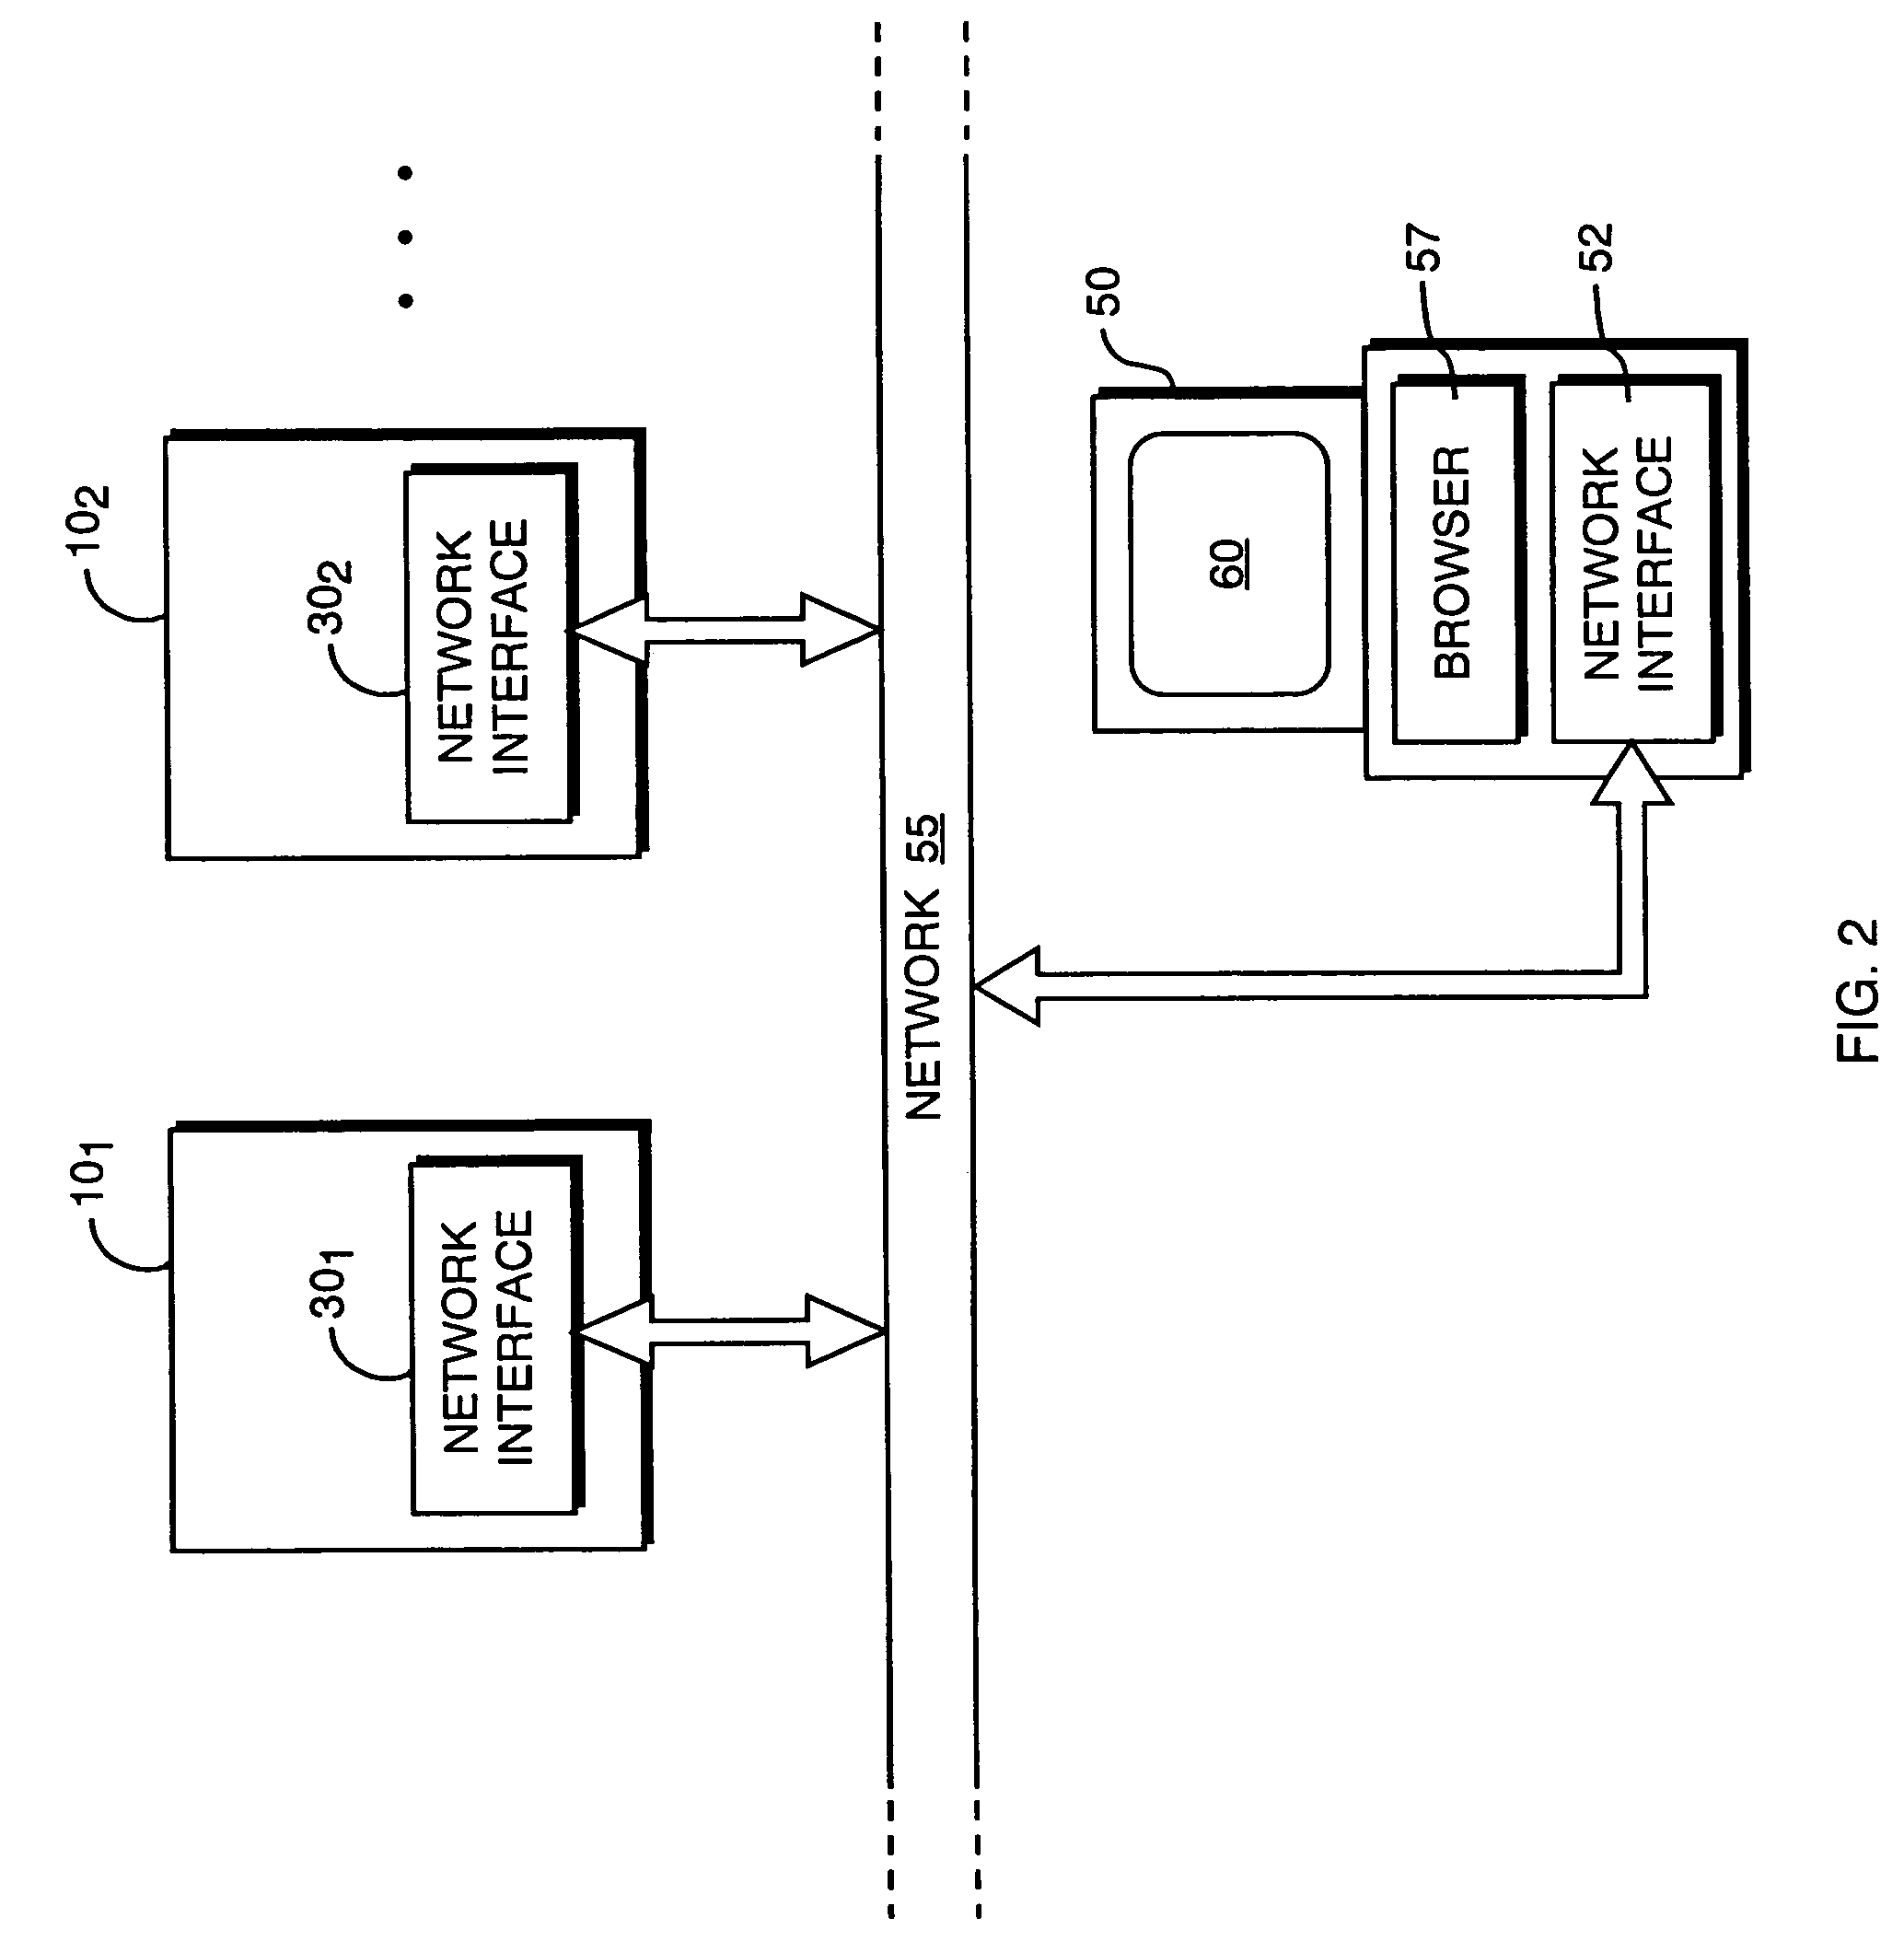 Method and system for monitoring a controller and displaying data from the controller in a format provided by the controller